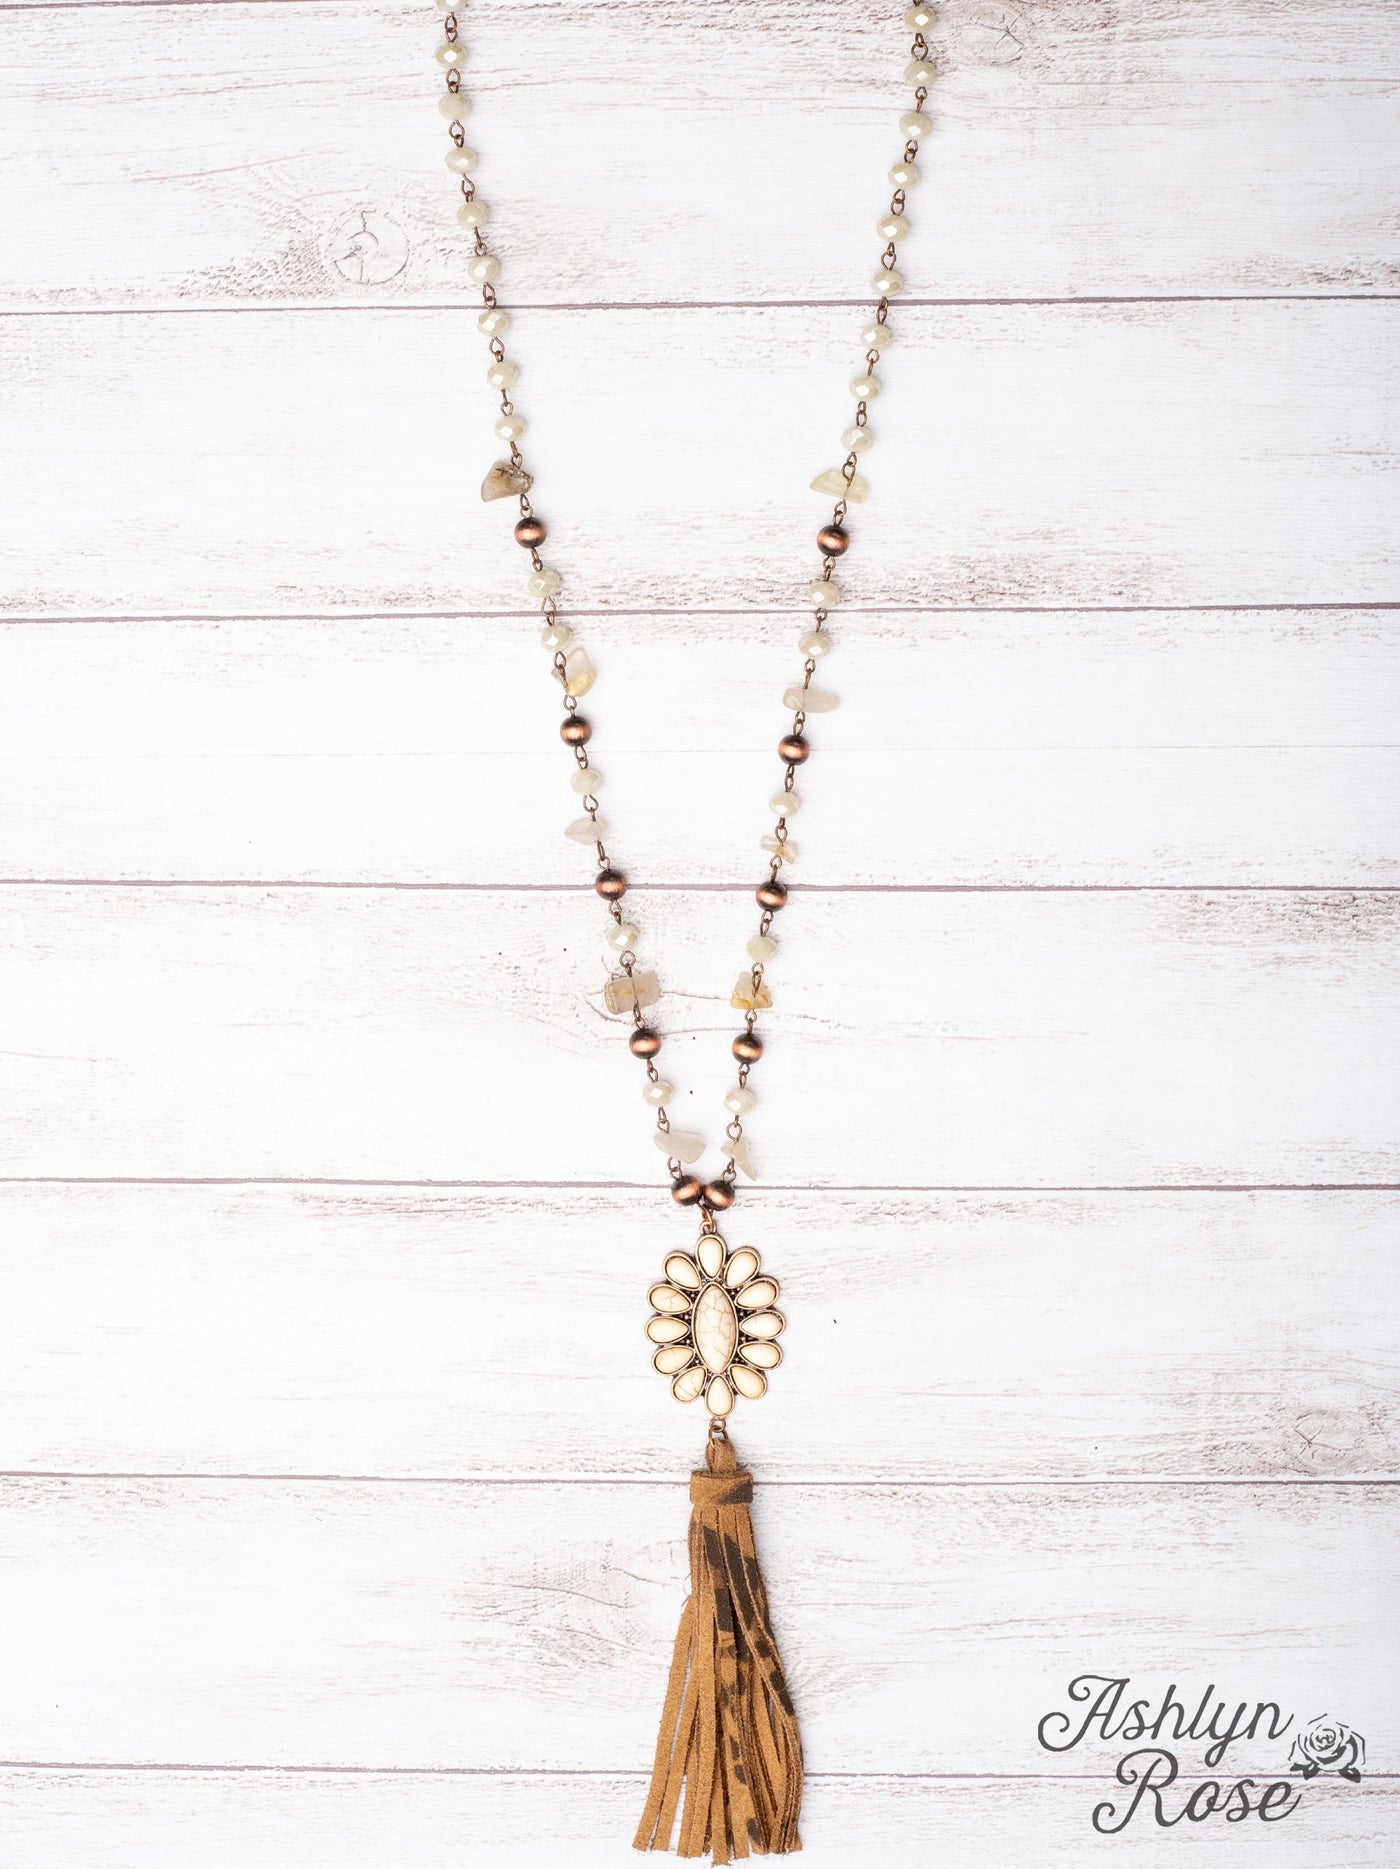 Chain Necklace with Tassel Pendant